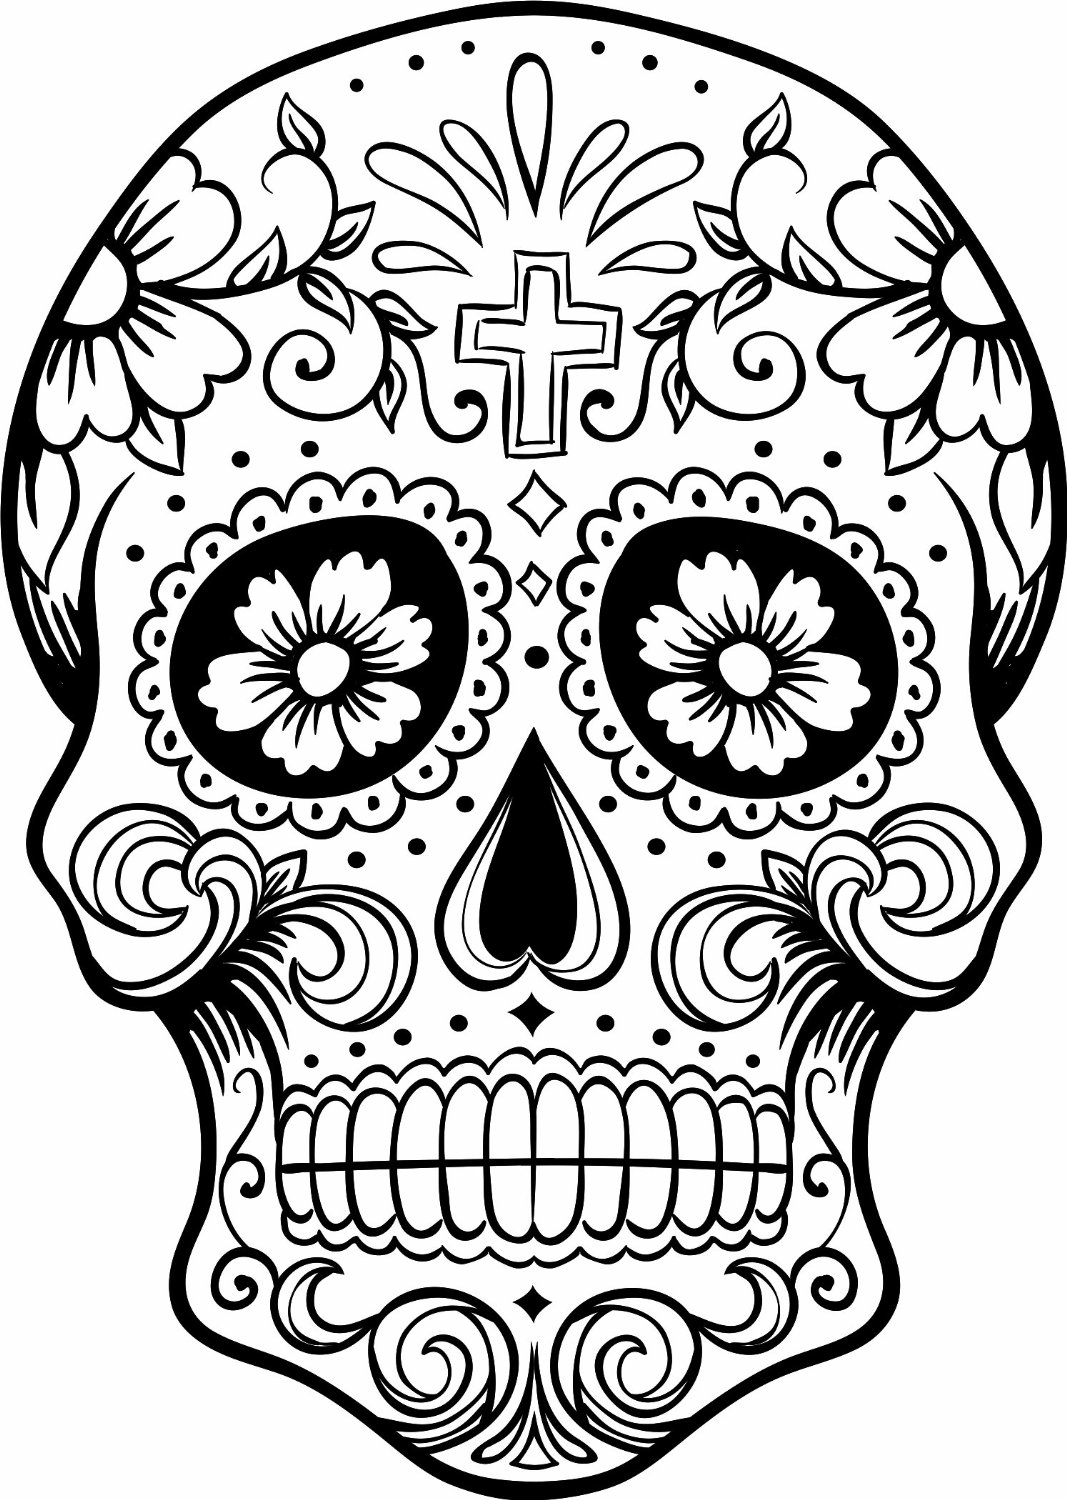 coloring ~ Coloring Day Of The Mexican Skulls Splendi ...